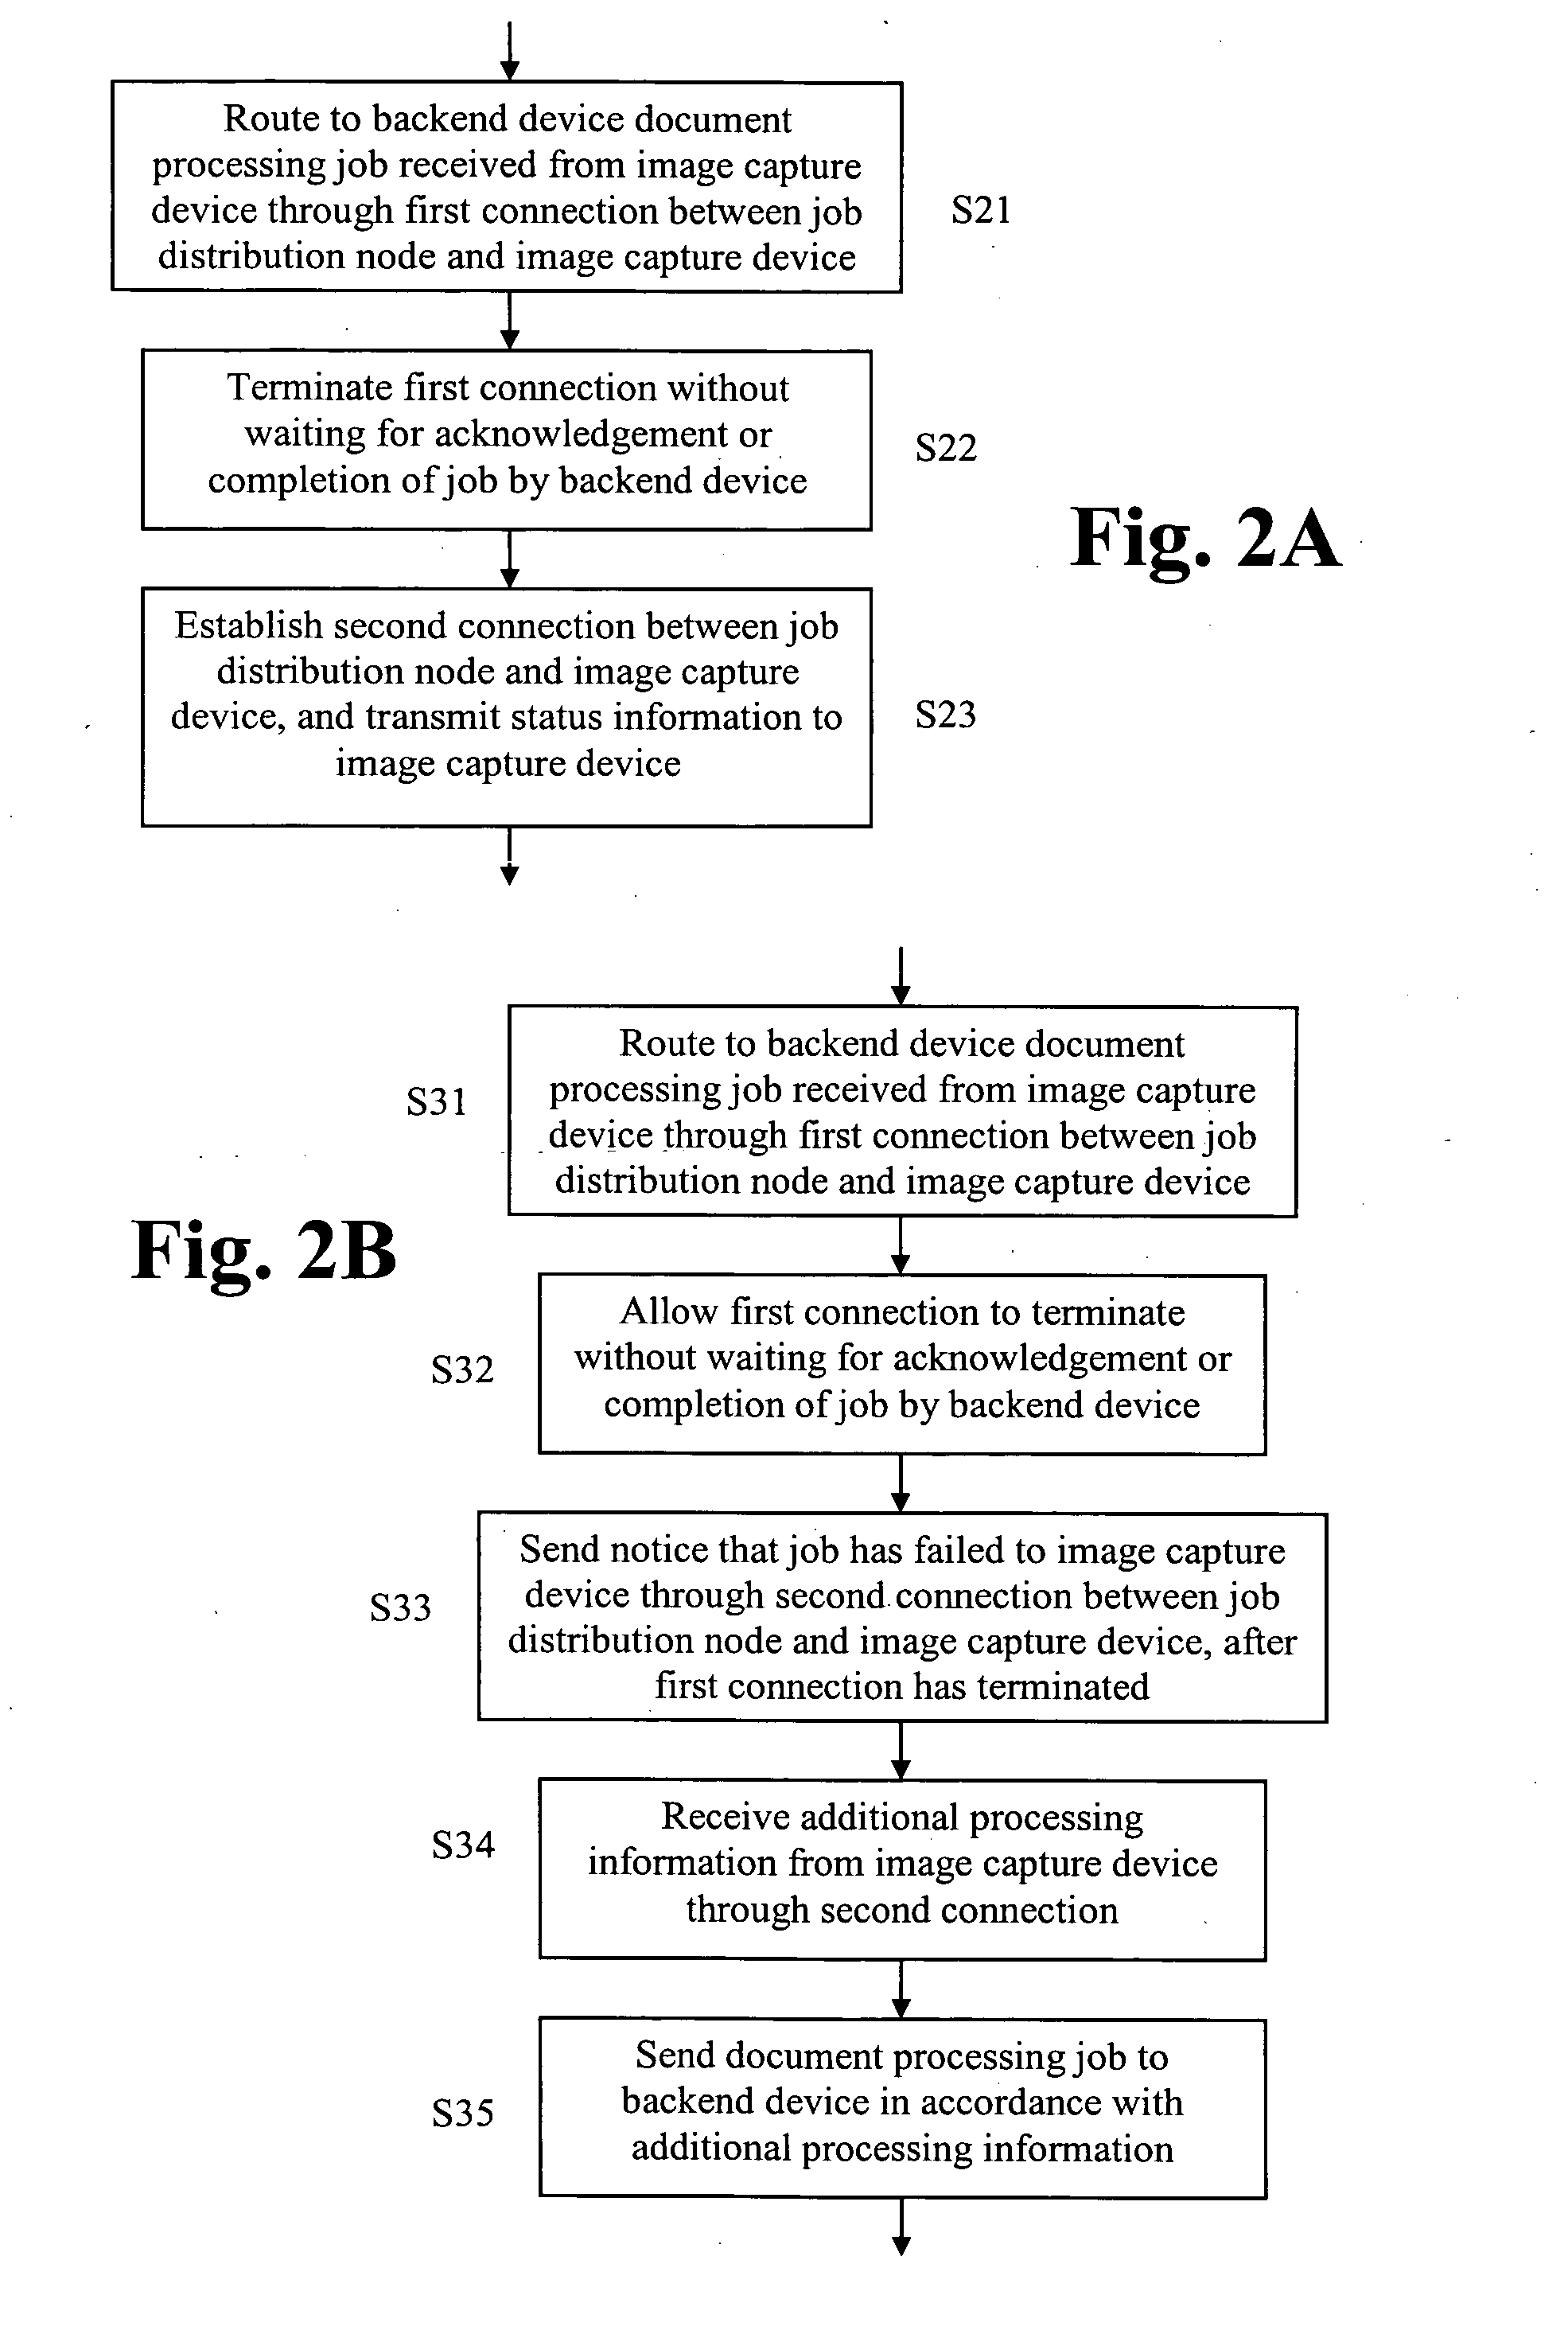 Bi-directional status and control between image capture device and backend device